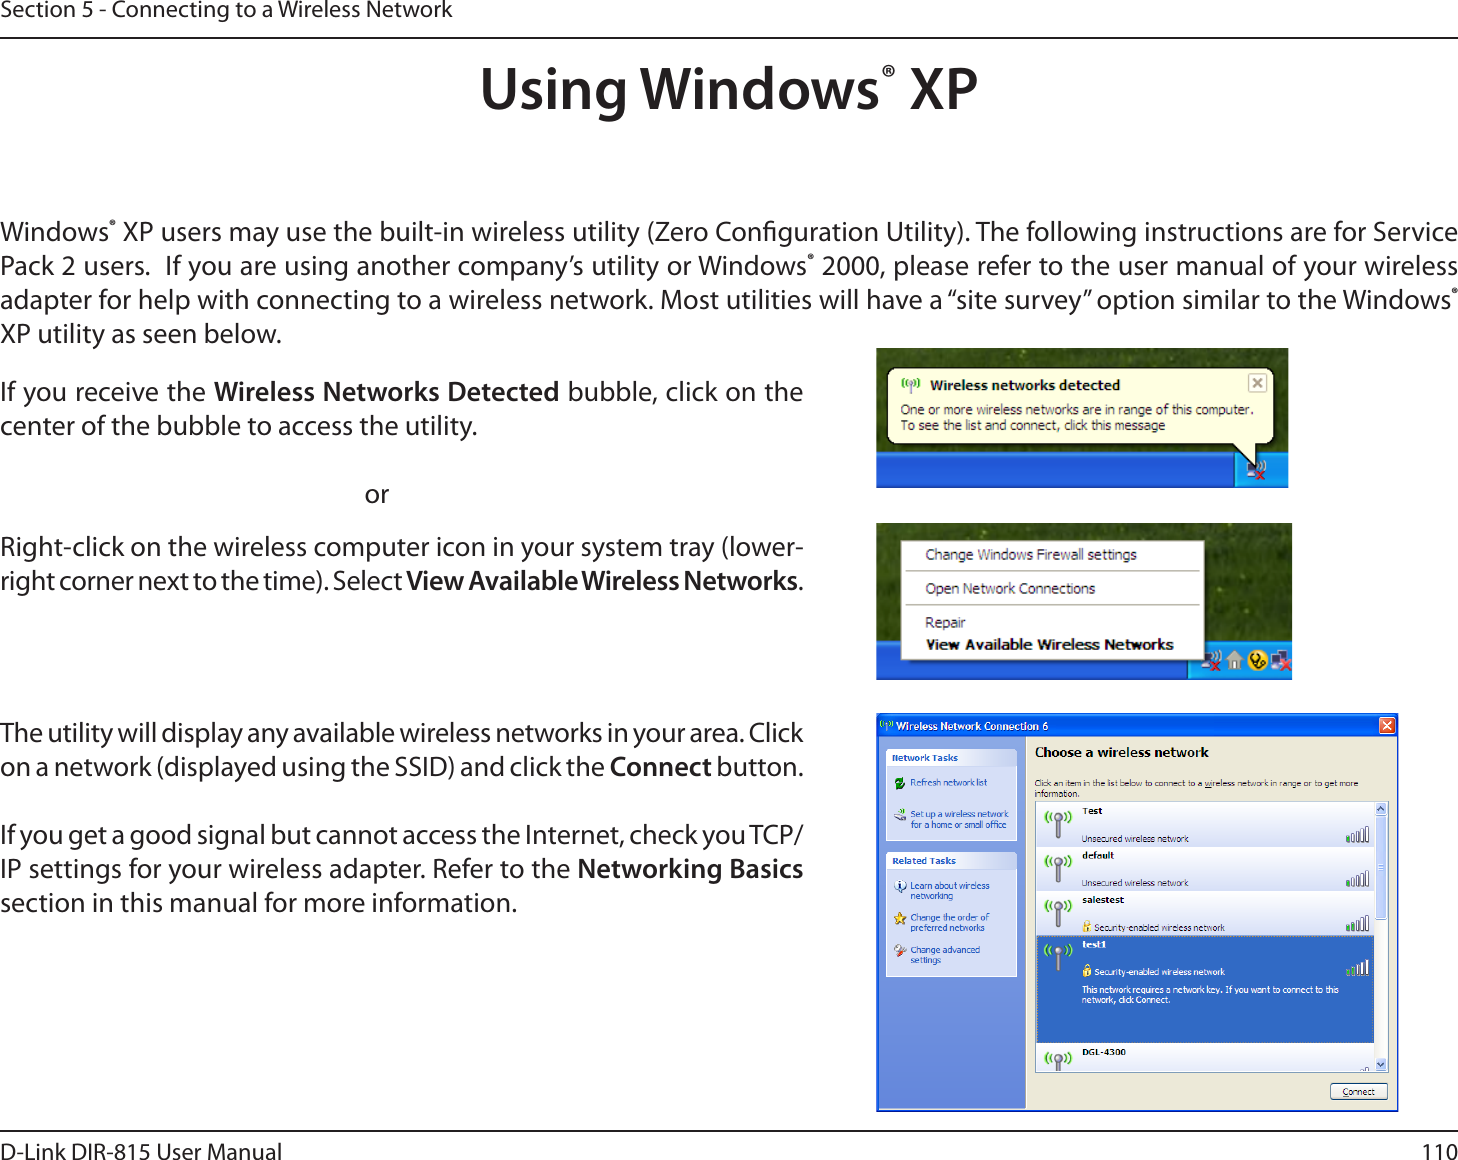 110D-Link DIR-815 User ManualSection 5 - Connecting to a Wireless NetworkUsing Windows® XPWindows® XP users may use the built-in wireless utility (Zero Conguration Utility). The following instructions are for Service Pack 2 users.  If you are using another company’s utility or Windows® 2000, please refer to the user manual of your wireless adapter for help with connecting to a wireless network. Most utilities will have a “site survey” option similar to the Windows® XP utility as seen below.Right-click on the wireless computer icon in your system tray (lower-right corner next to the time). Select View Available Wireless Networks.If you receive the Wireless Networks Detected bubble, click on the center of the bubble to access the utility.     orThe utility will display any available wireless networks in your area. Click on a network (displayed using the SSID) and click the Connect button.If you get a good signal but cannot access the Internet, check you TCP/IP settings for your wireless adapter. Refer to the Networking Basics section in this manual for more information.